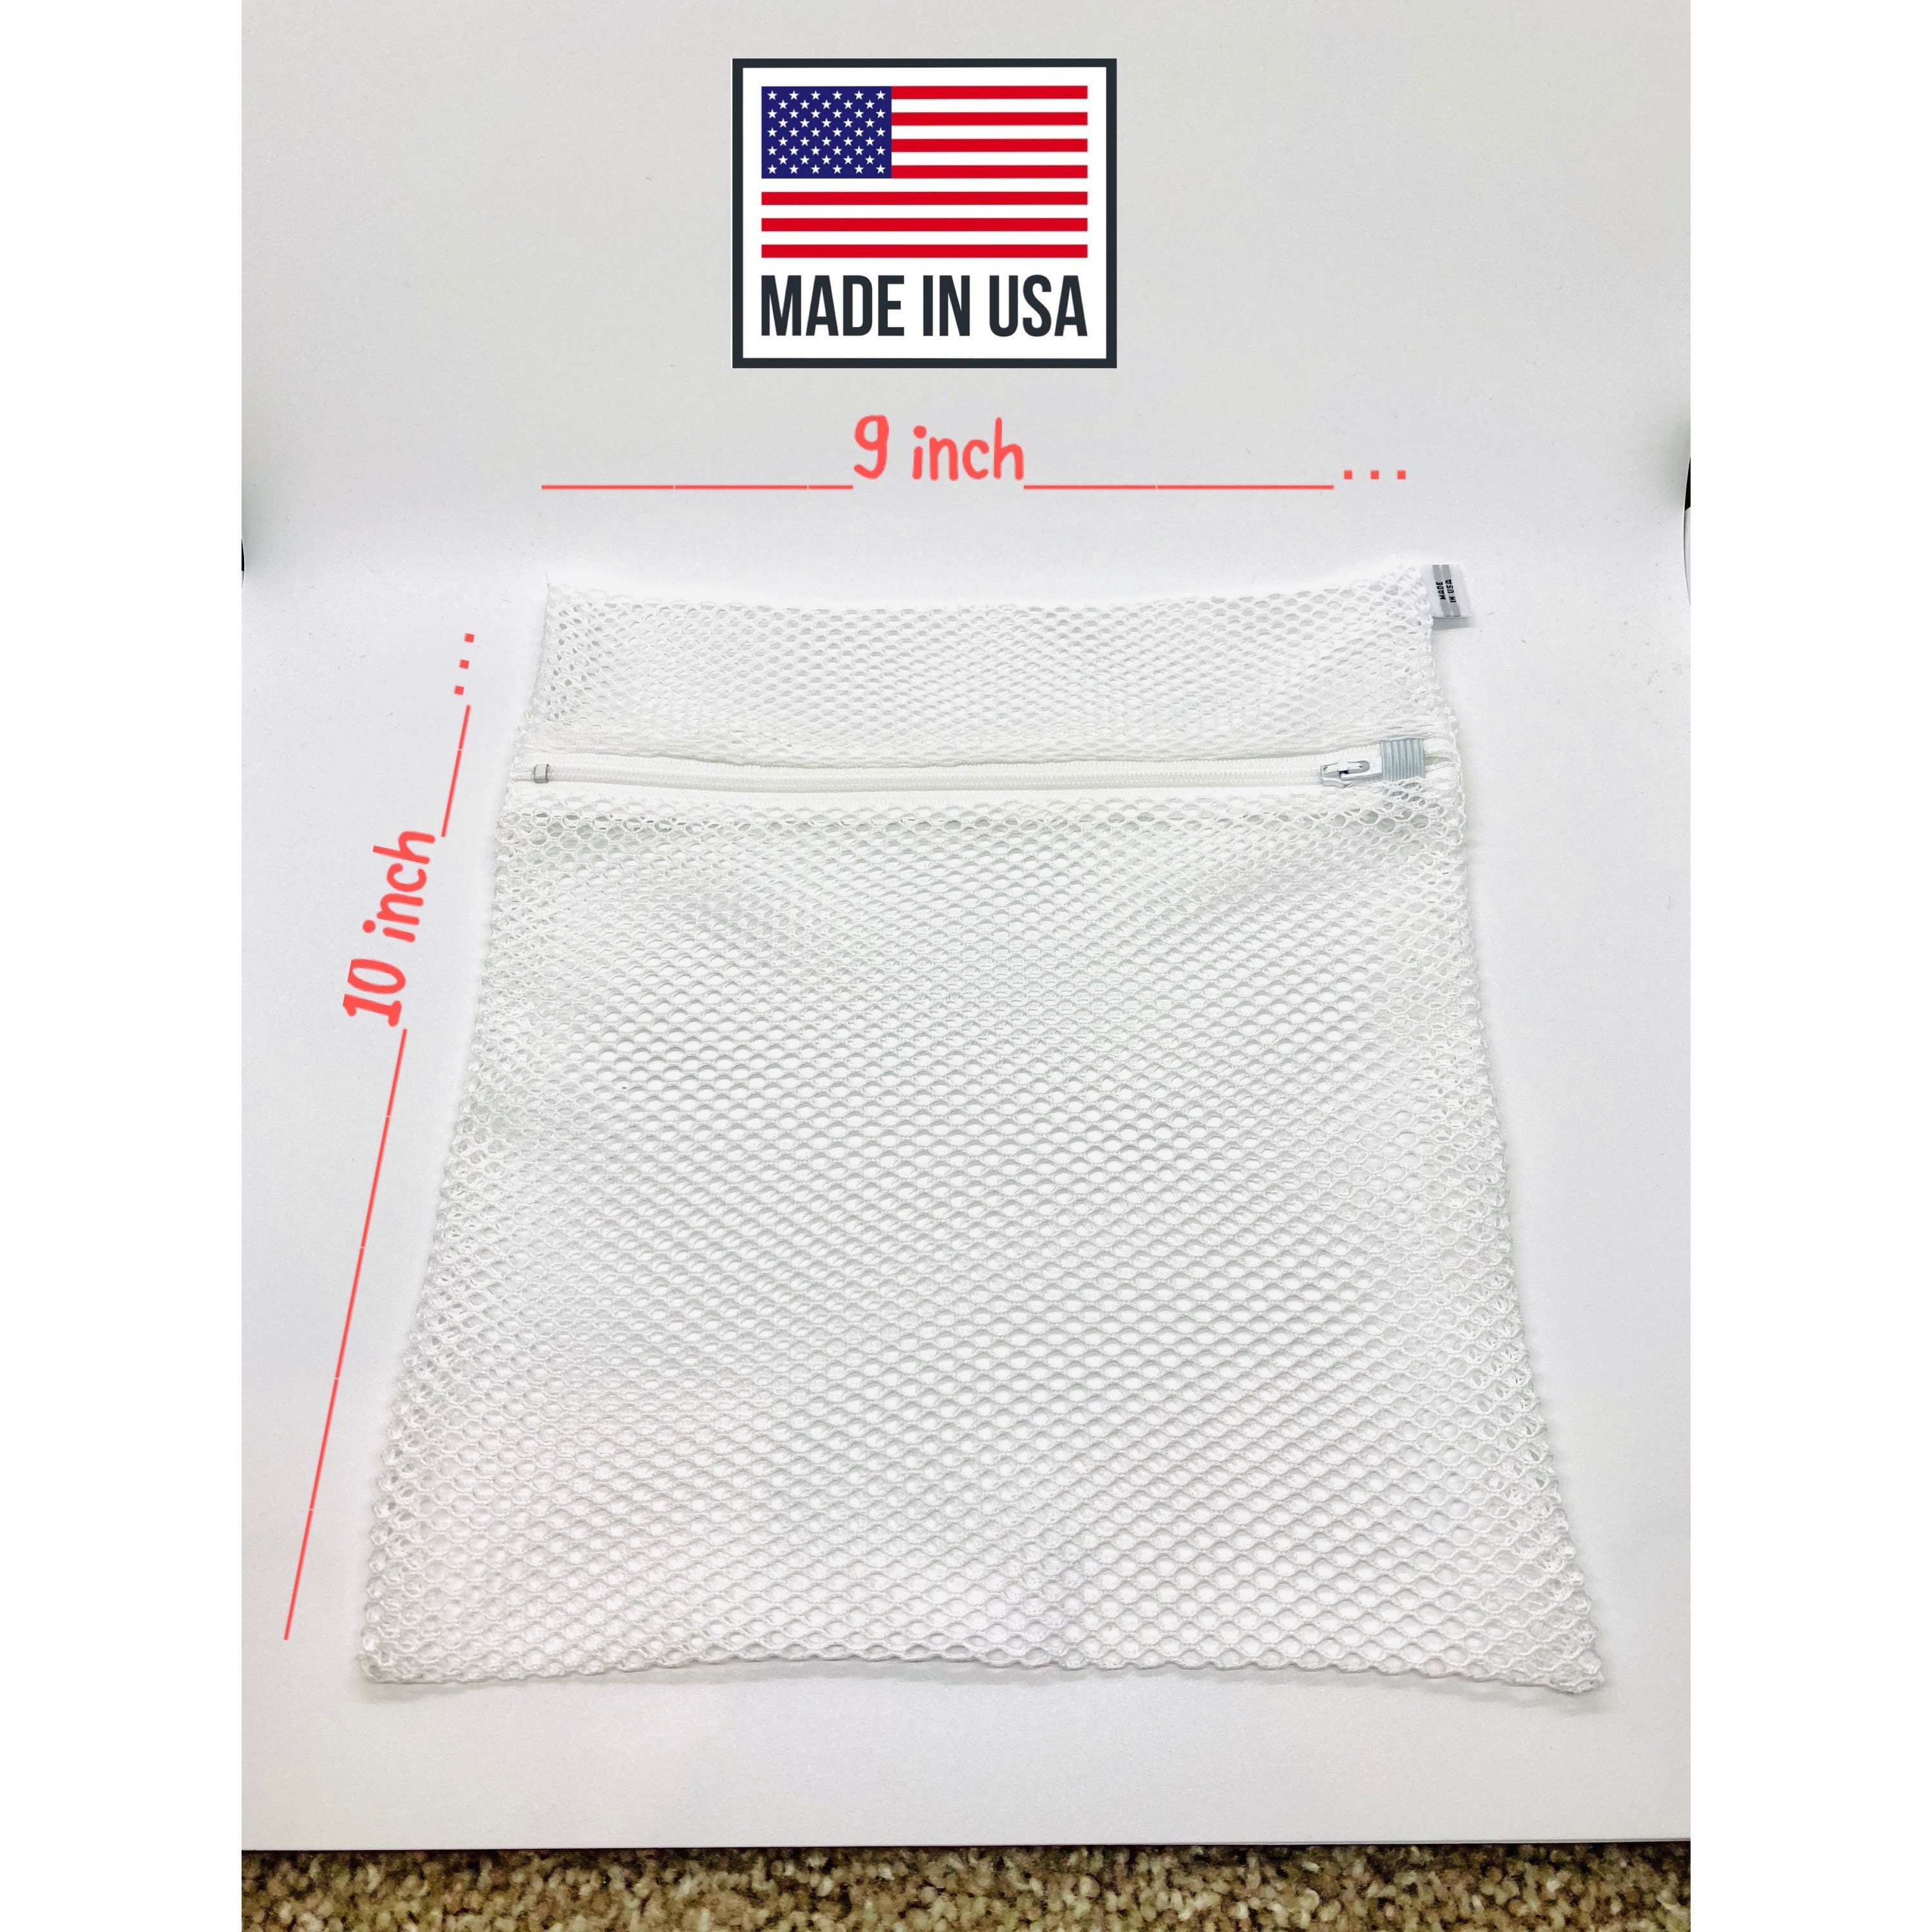 Linen Mesh Laundry Bag for Socks, Bra or Delicates. Lightweight Drawstring Wash  Bag. Washable Laundry Mesh Bags to Protect Your Clothing. 